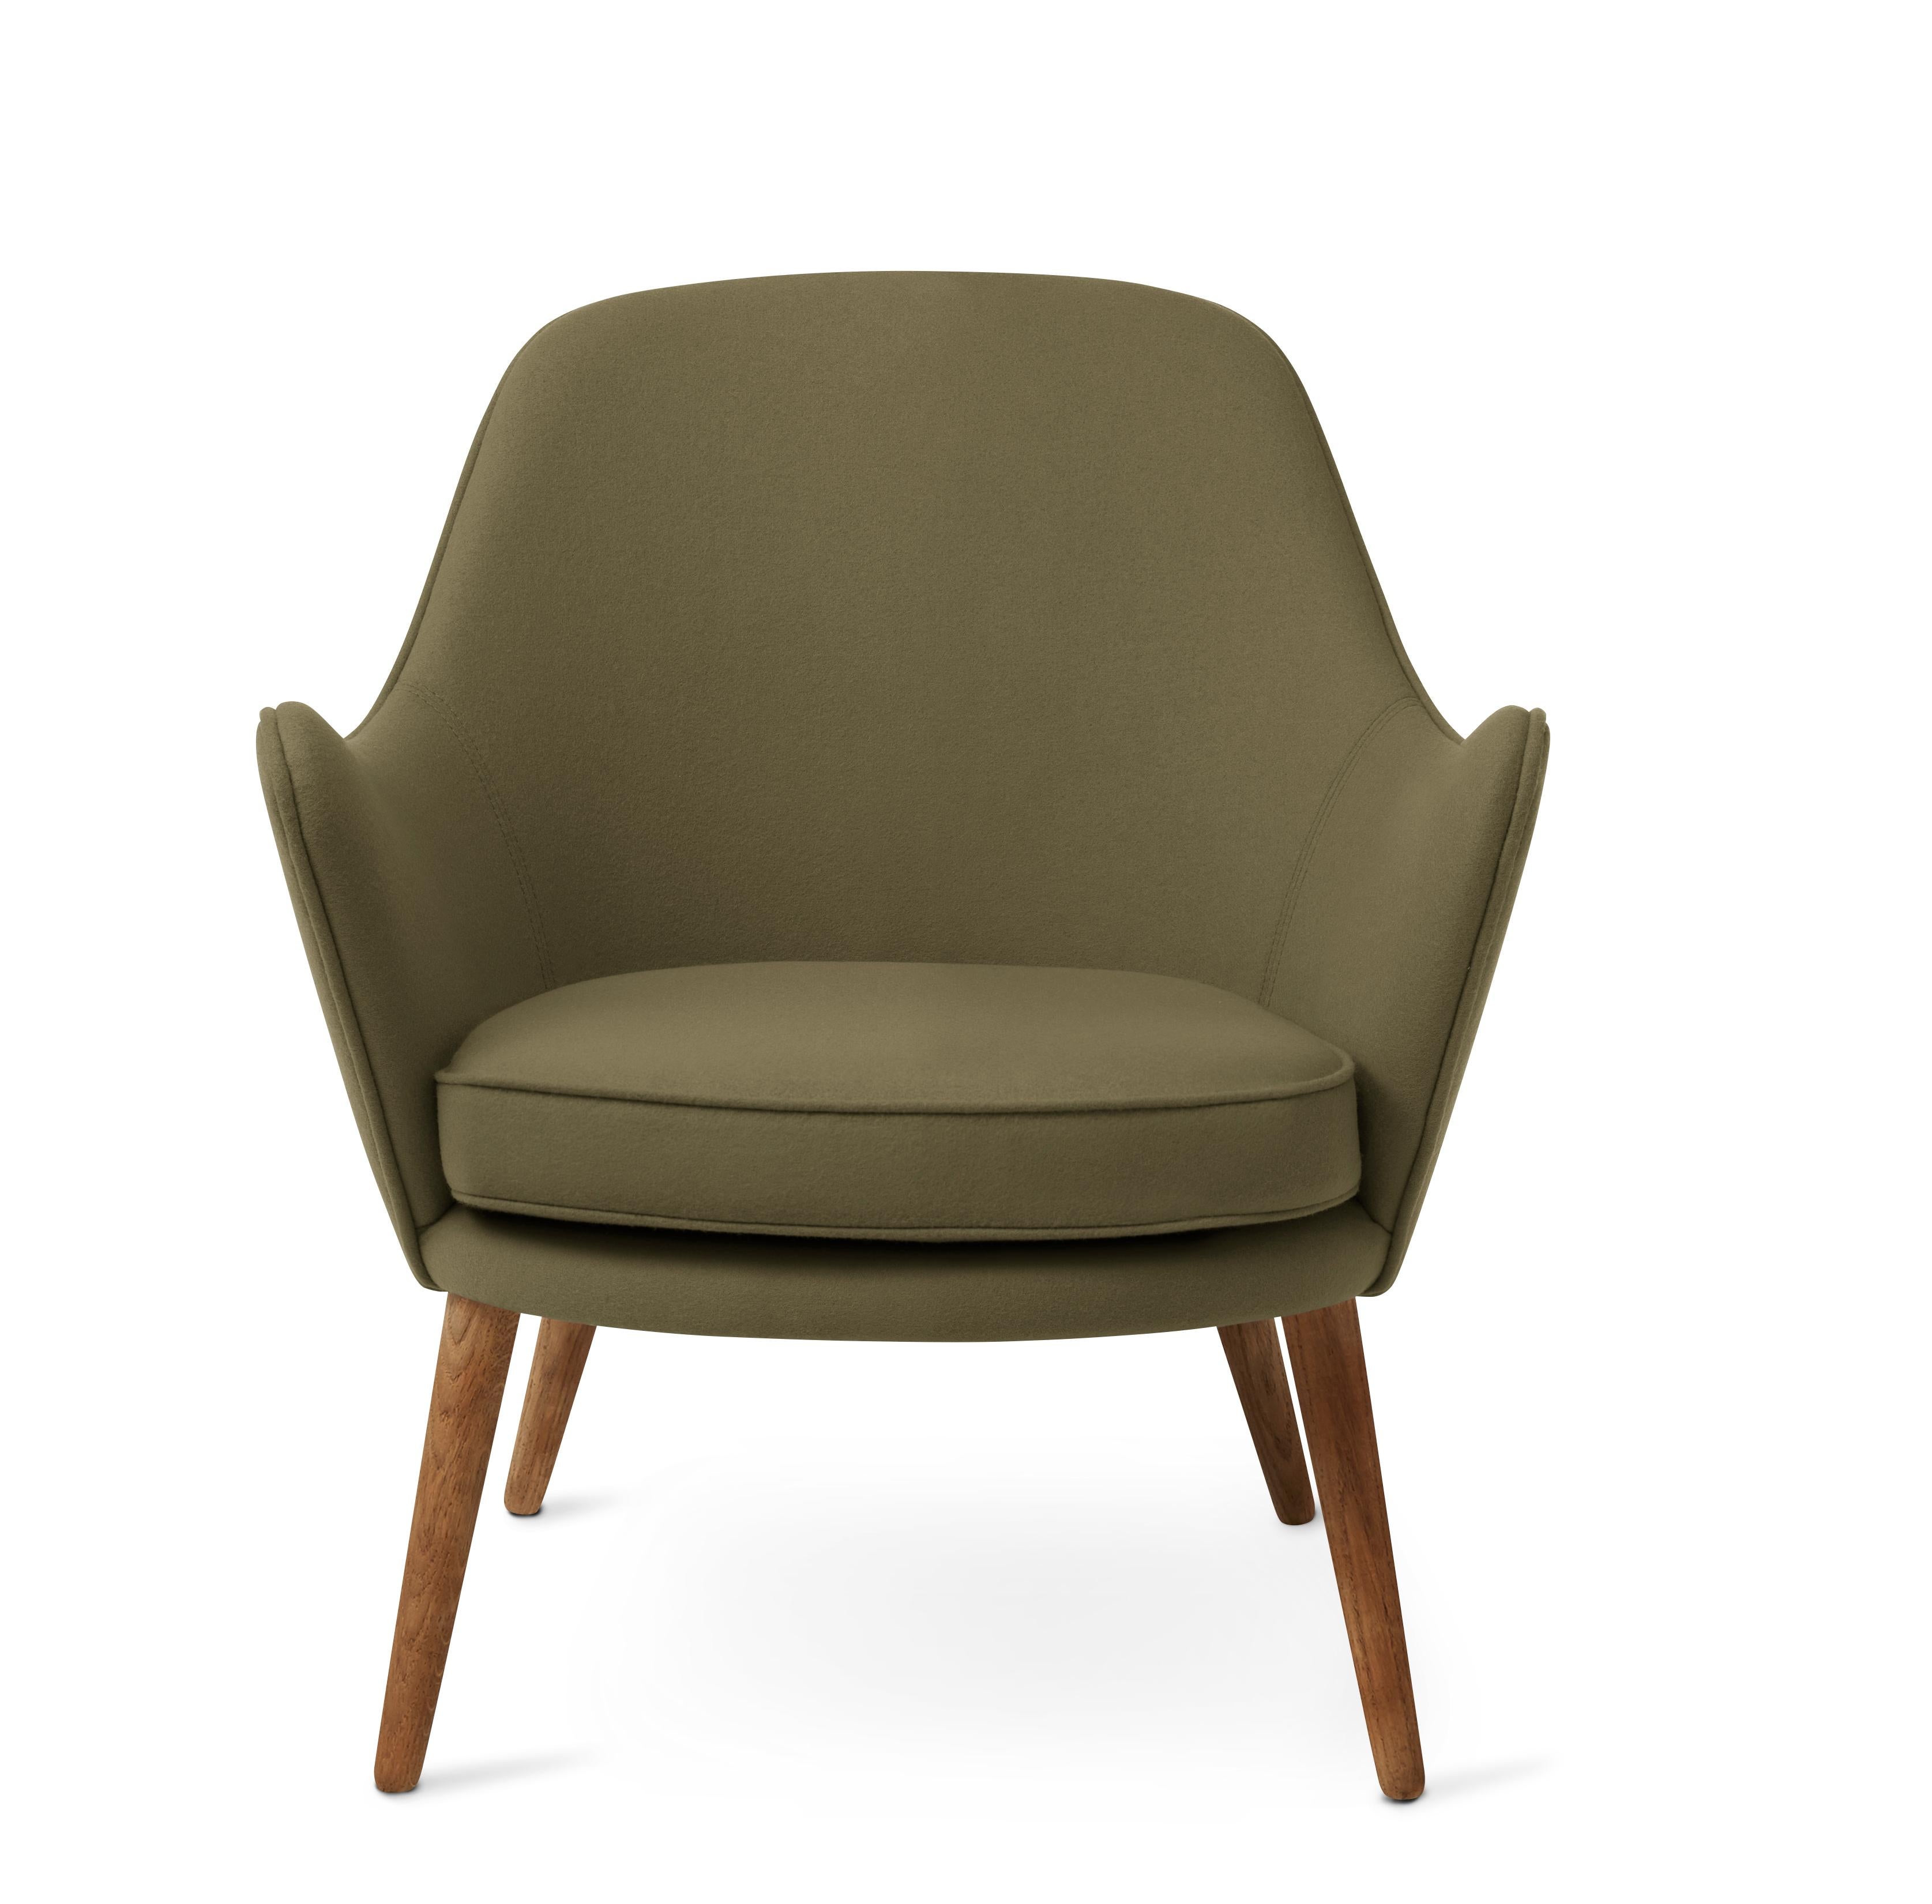 For Sale: Green (Hero 981) Dwell Lounge Chair, by Hans Olsen from Warm Nordic